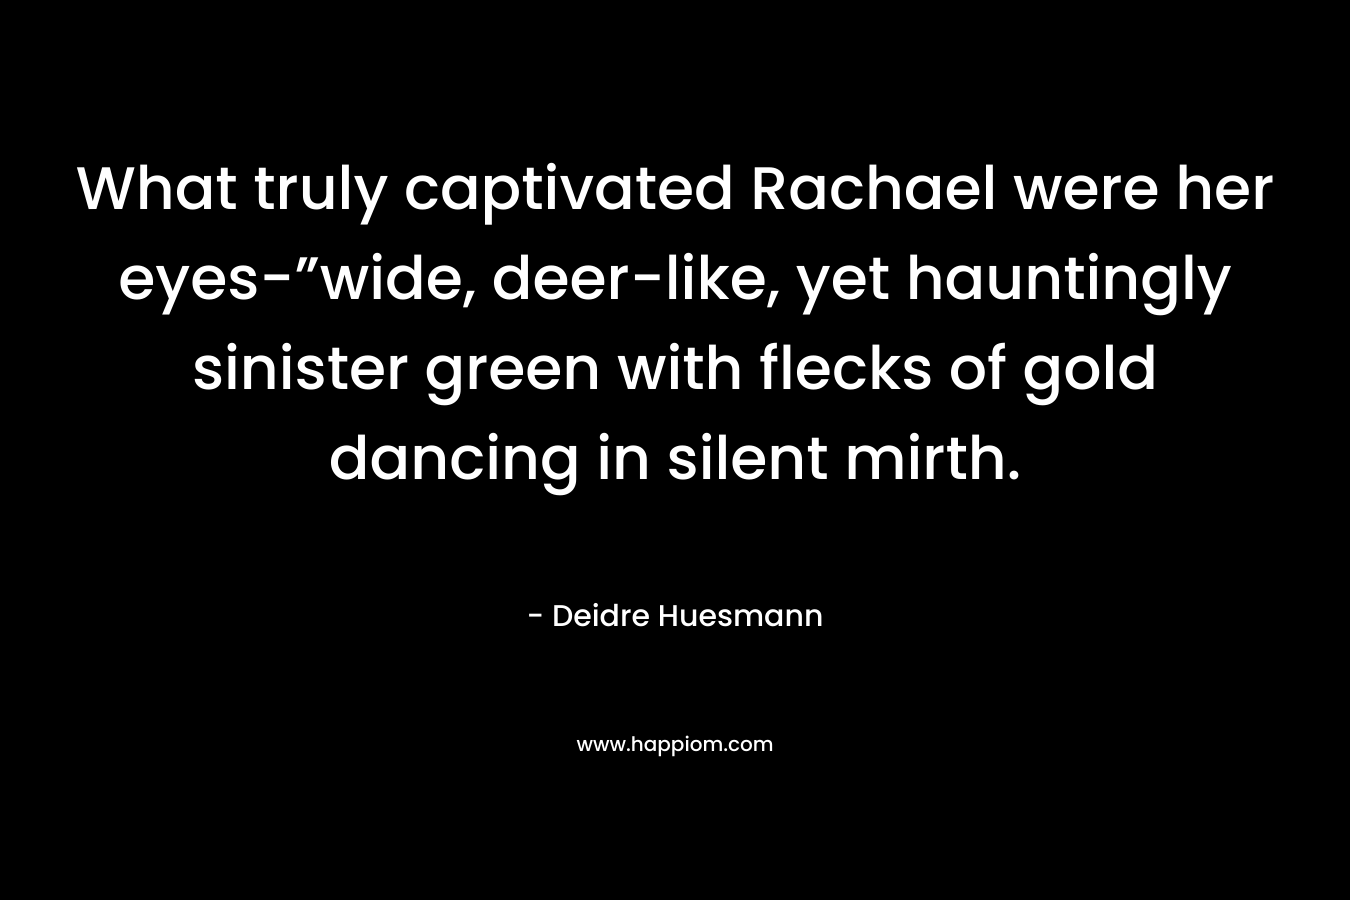 What truly captivated Rachael were her eyes-”wide, deer-like, yet hauntingly sinister green with flecks of gold dancing in silent mirth. – Deidre Huesmann